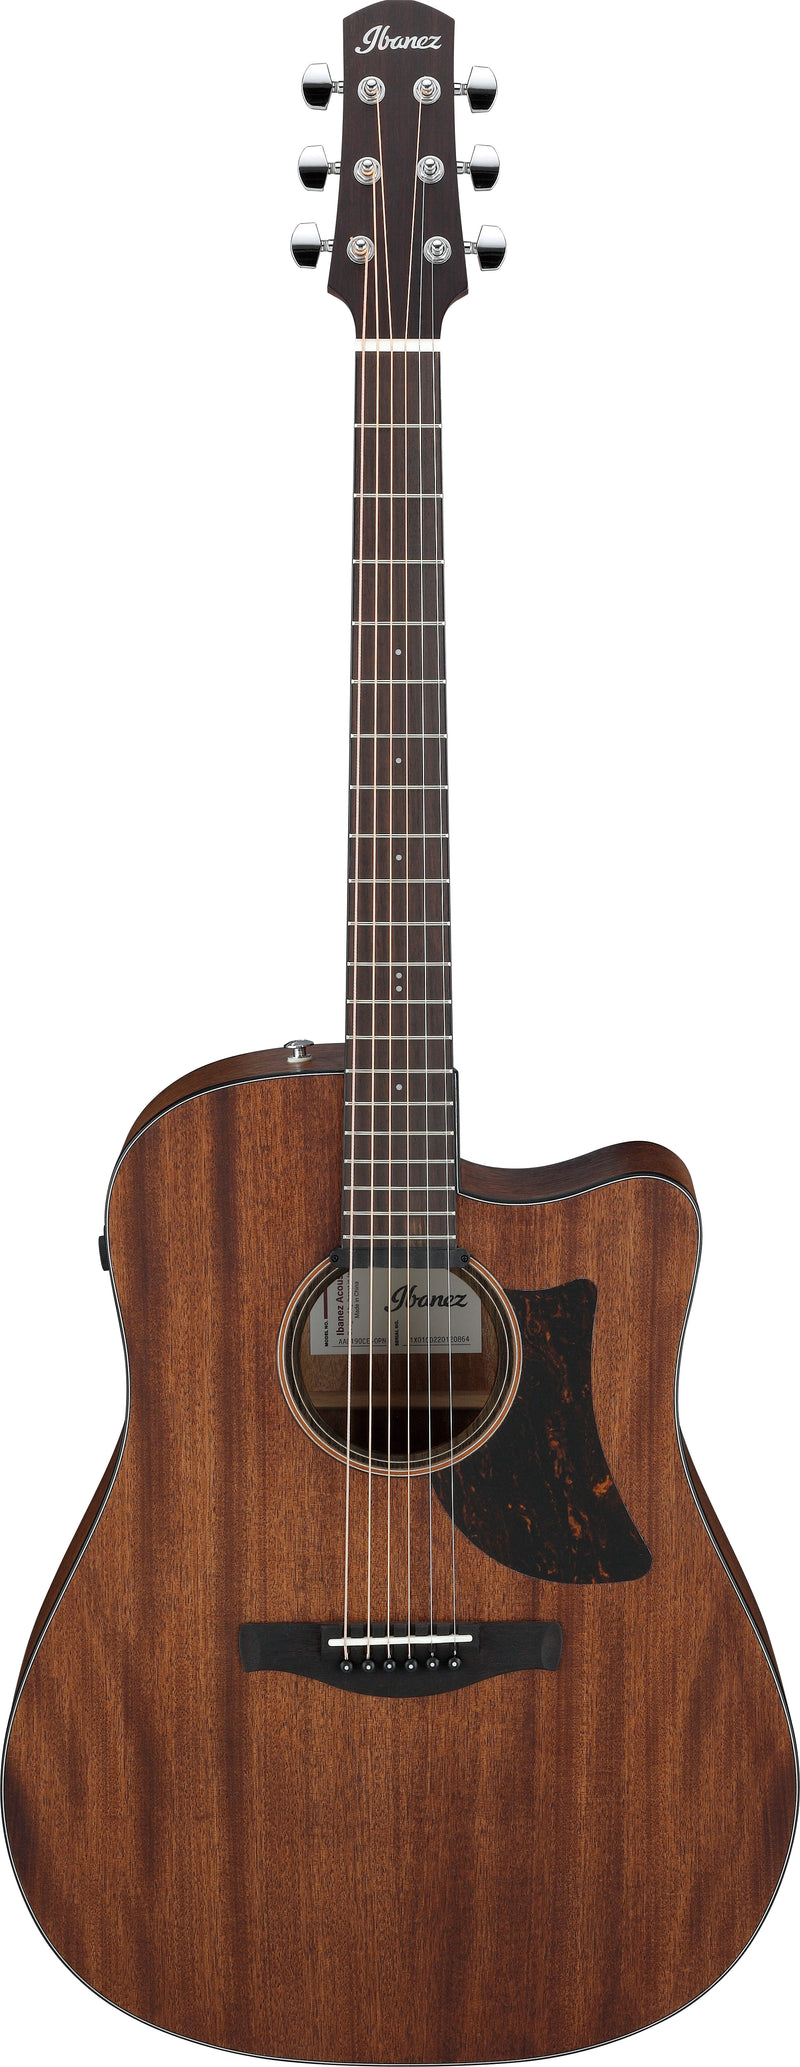 Ibanez AAD190CEOPN AAD Series 6 String RH Acoustic Electric Guitar (Open Pore Natural)